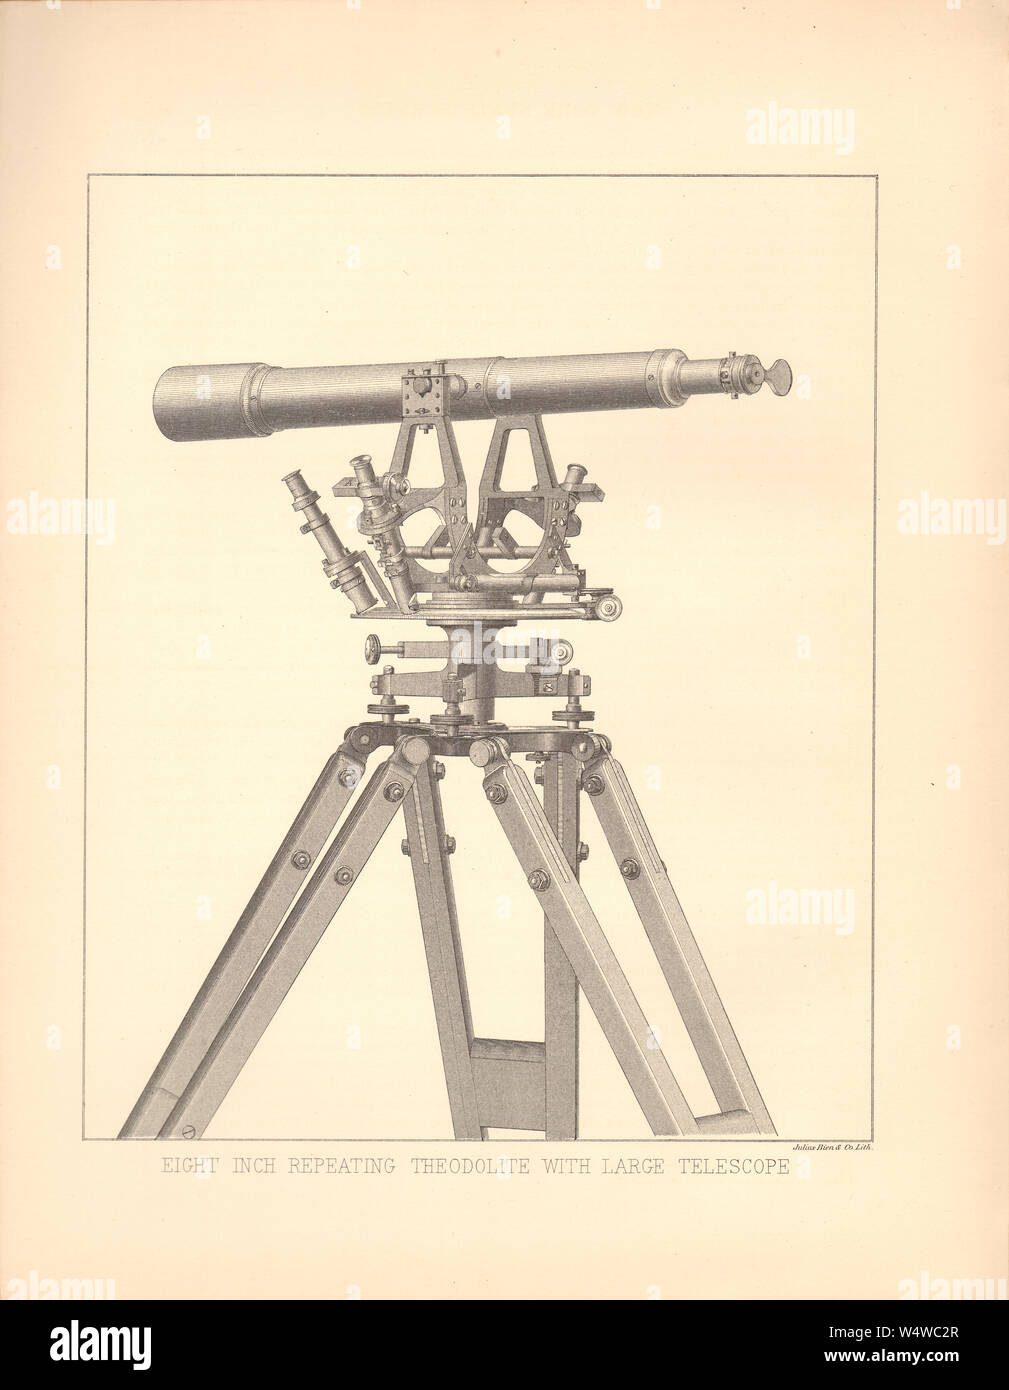 Eight-inch repeating theodolite with large telescope as used in measuring horizontal angles - Antiquarian image showing 19th century surveyor tools Stock Photo